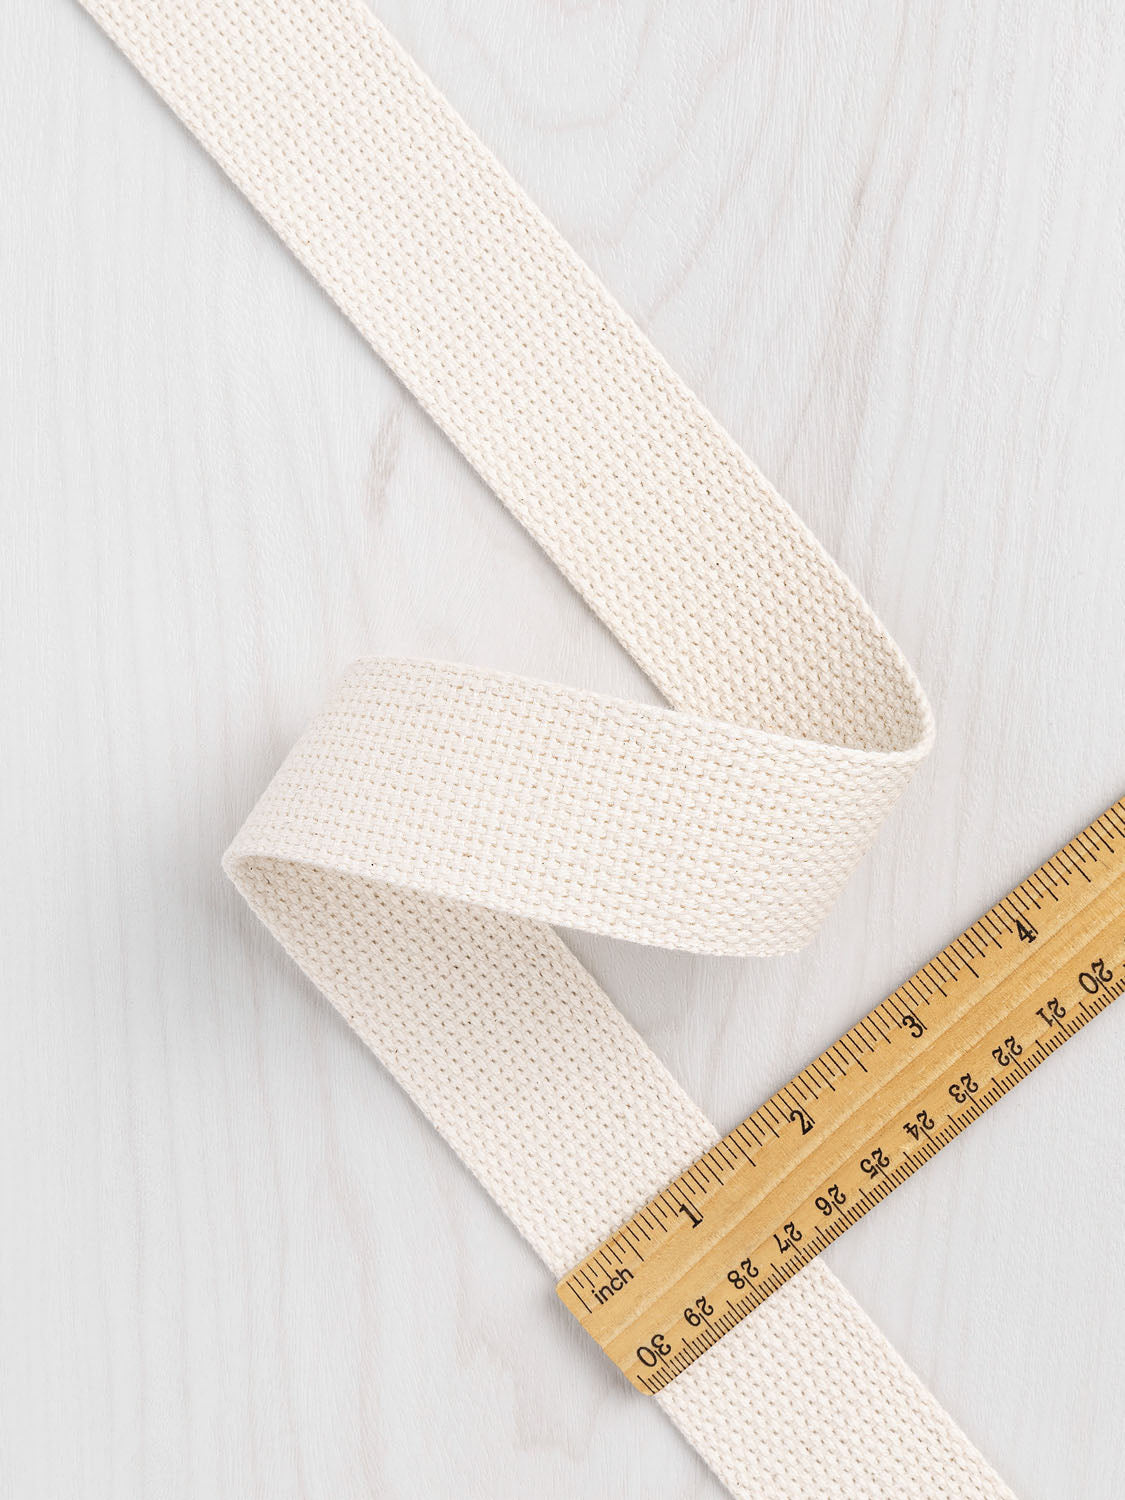 1.5 Cotton Webbing Strapping